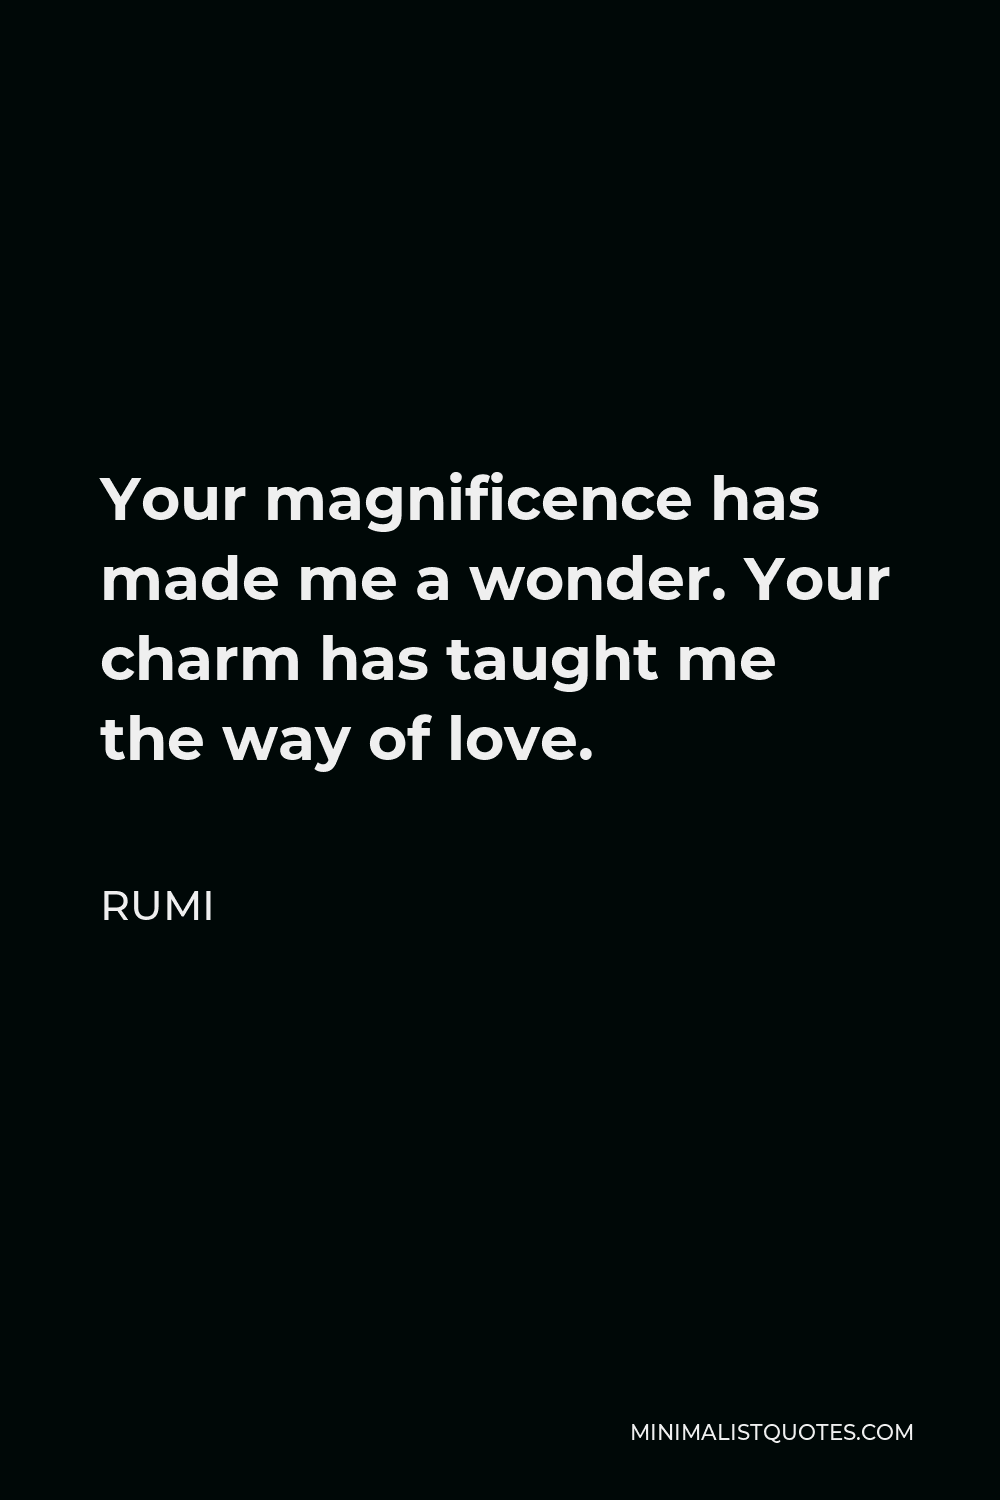 Rumi Quote - Your magnificence has made me a wonder. Your charm has taught me the way of love.